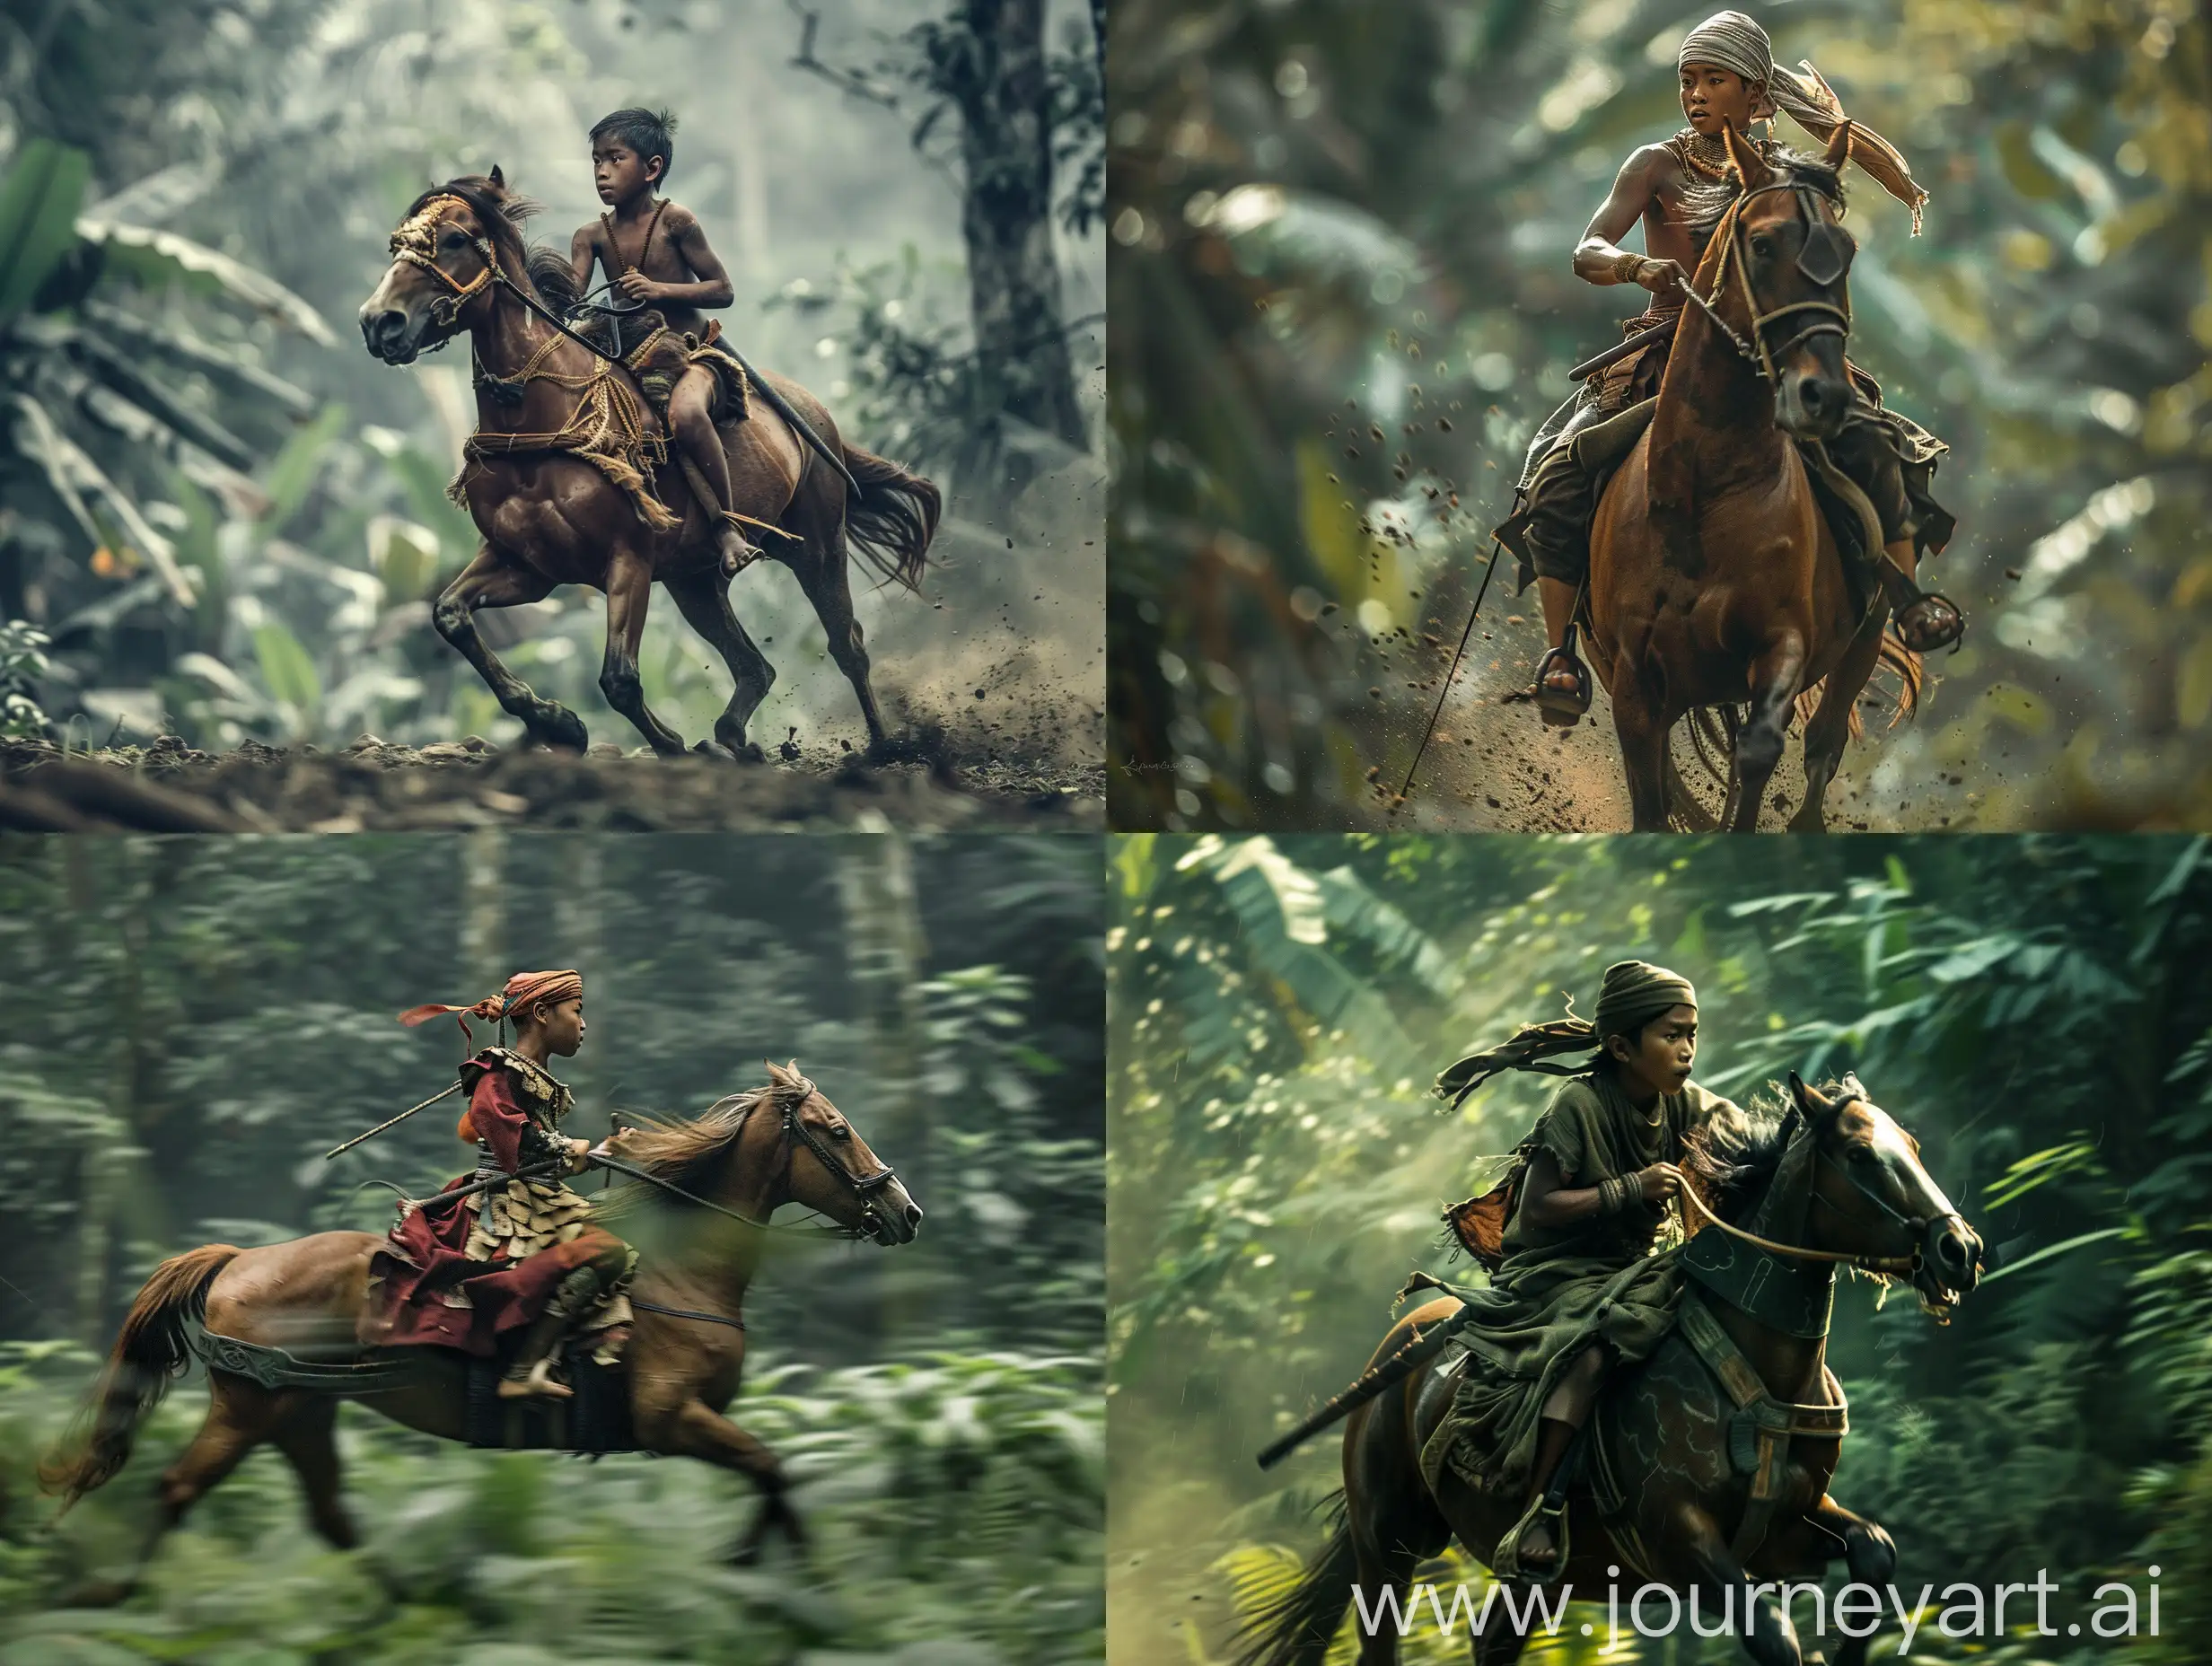 Majapahit kingdom : a young Indonesian warrior is riding a horse fast in the forest, full body view